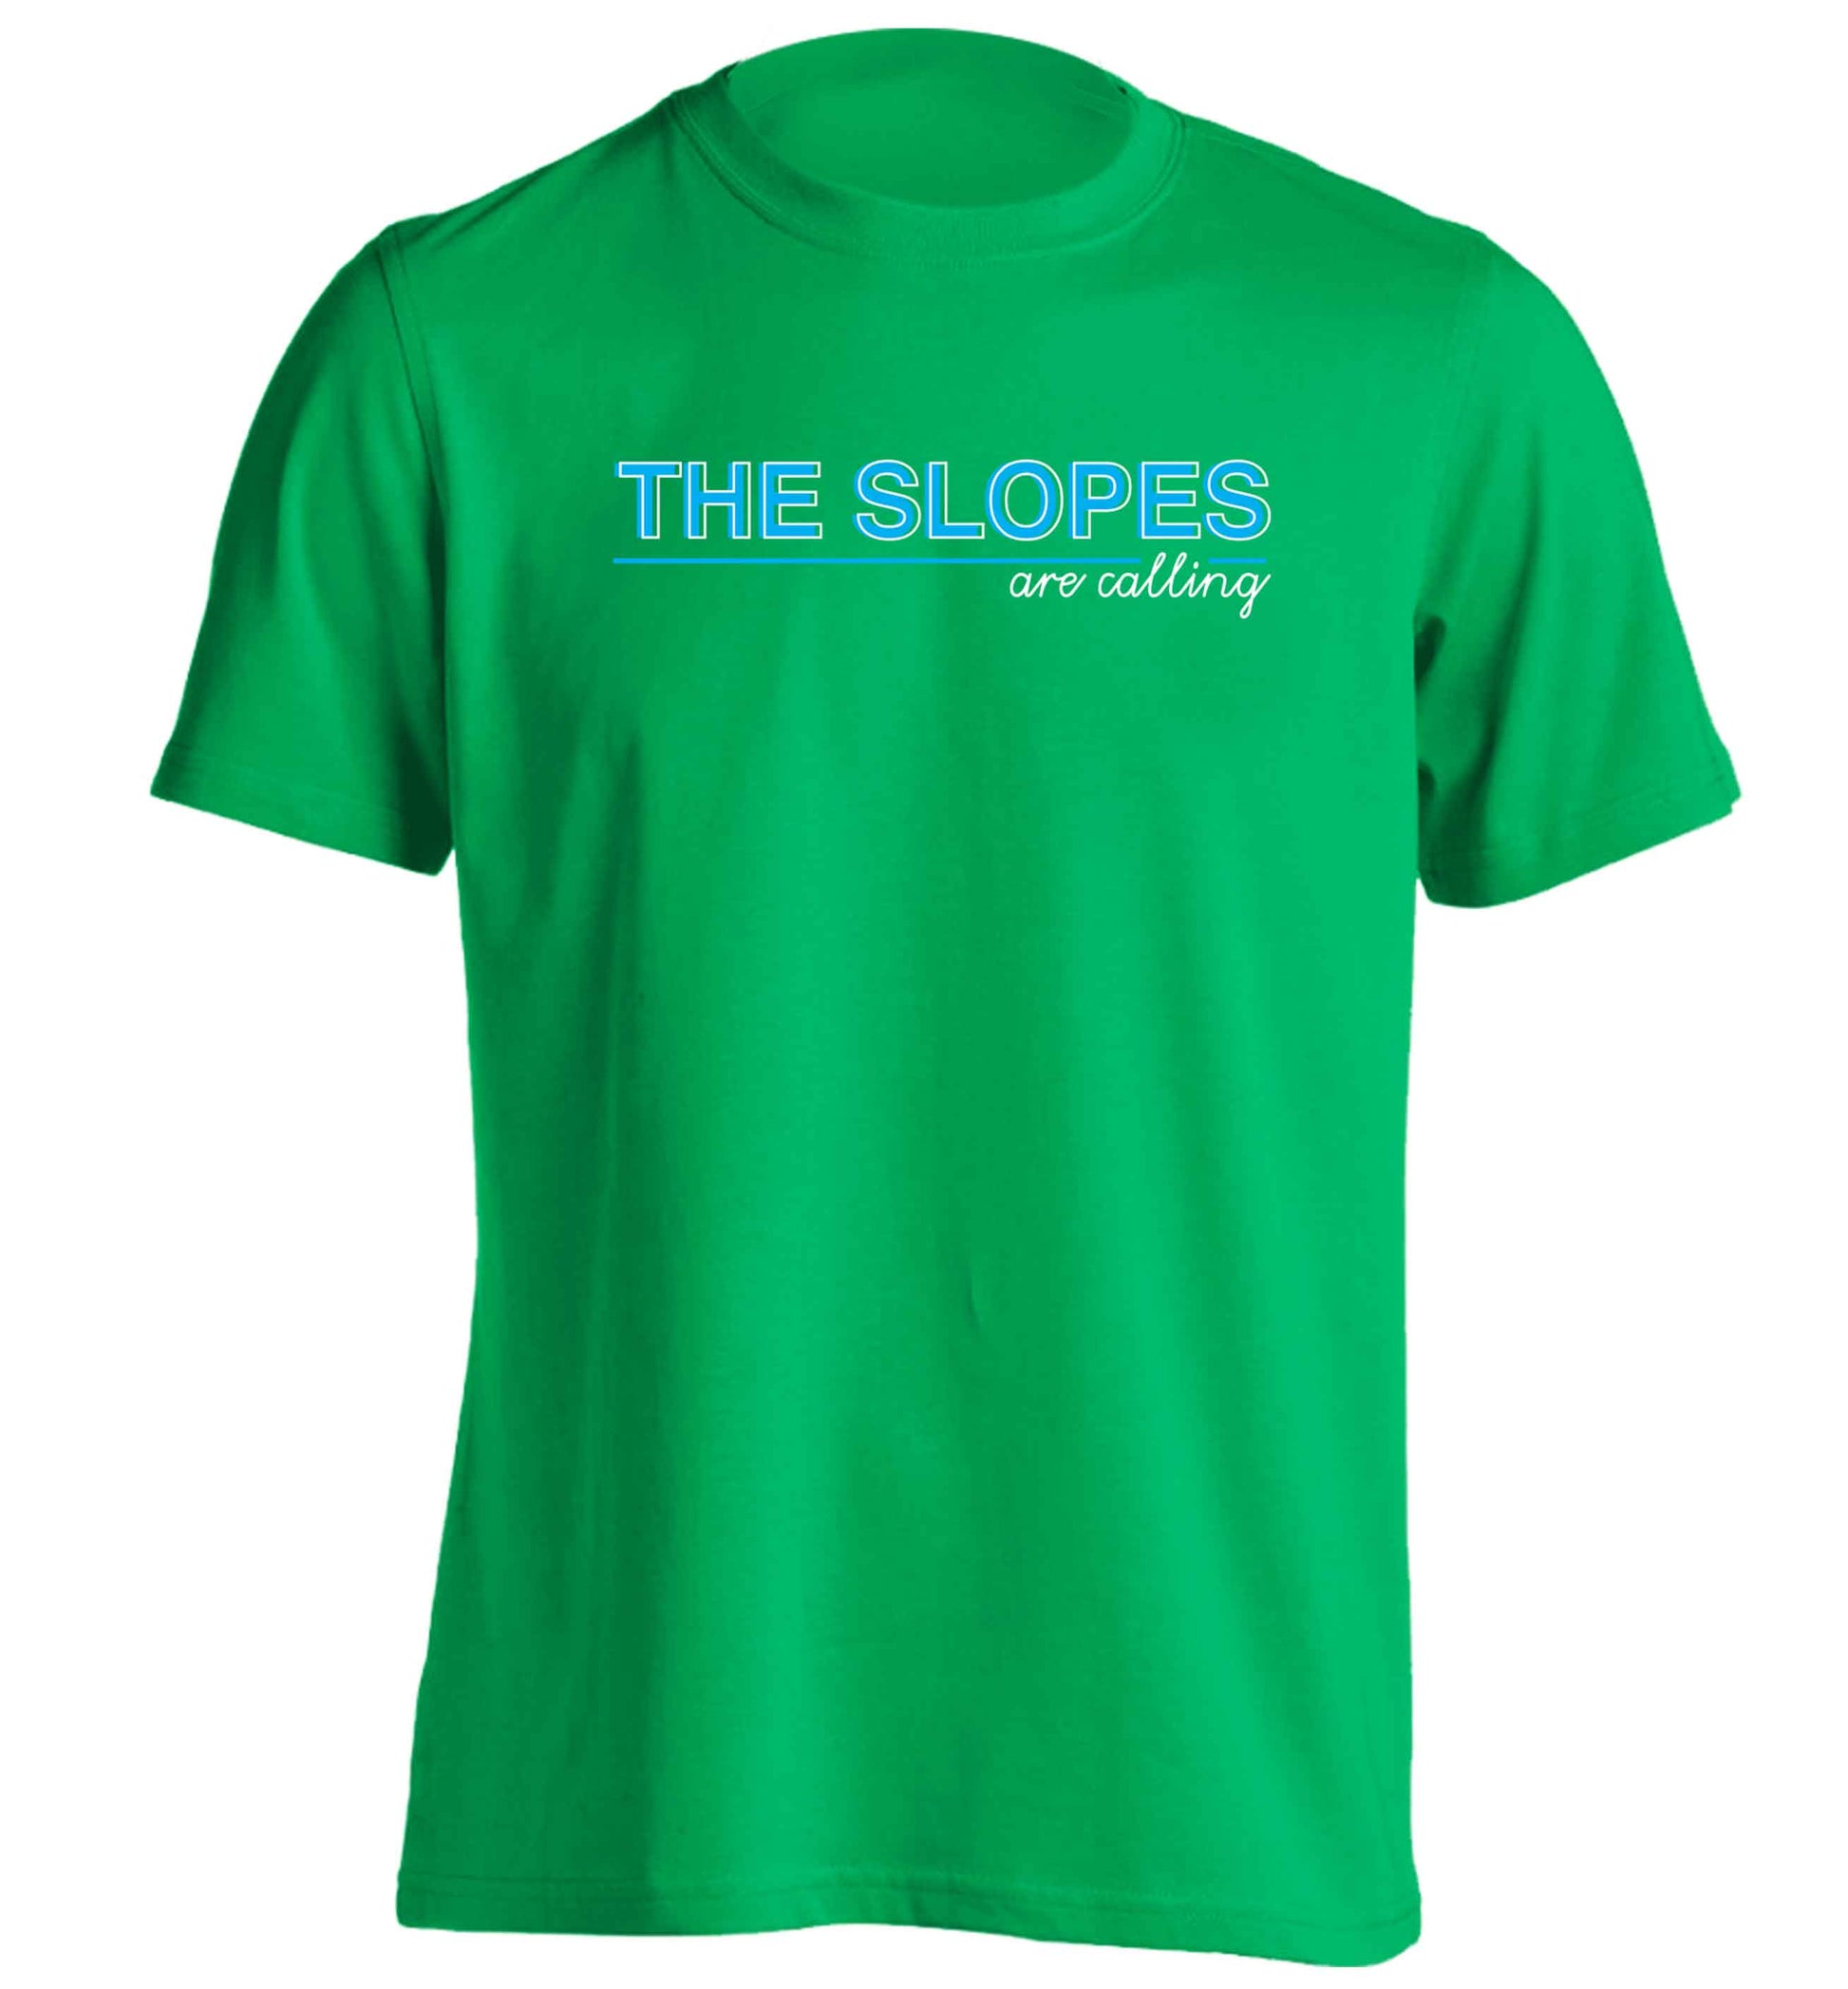 The slopes are calling adults unisex green Tshirt 2XL